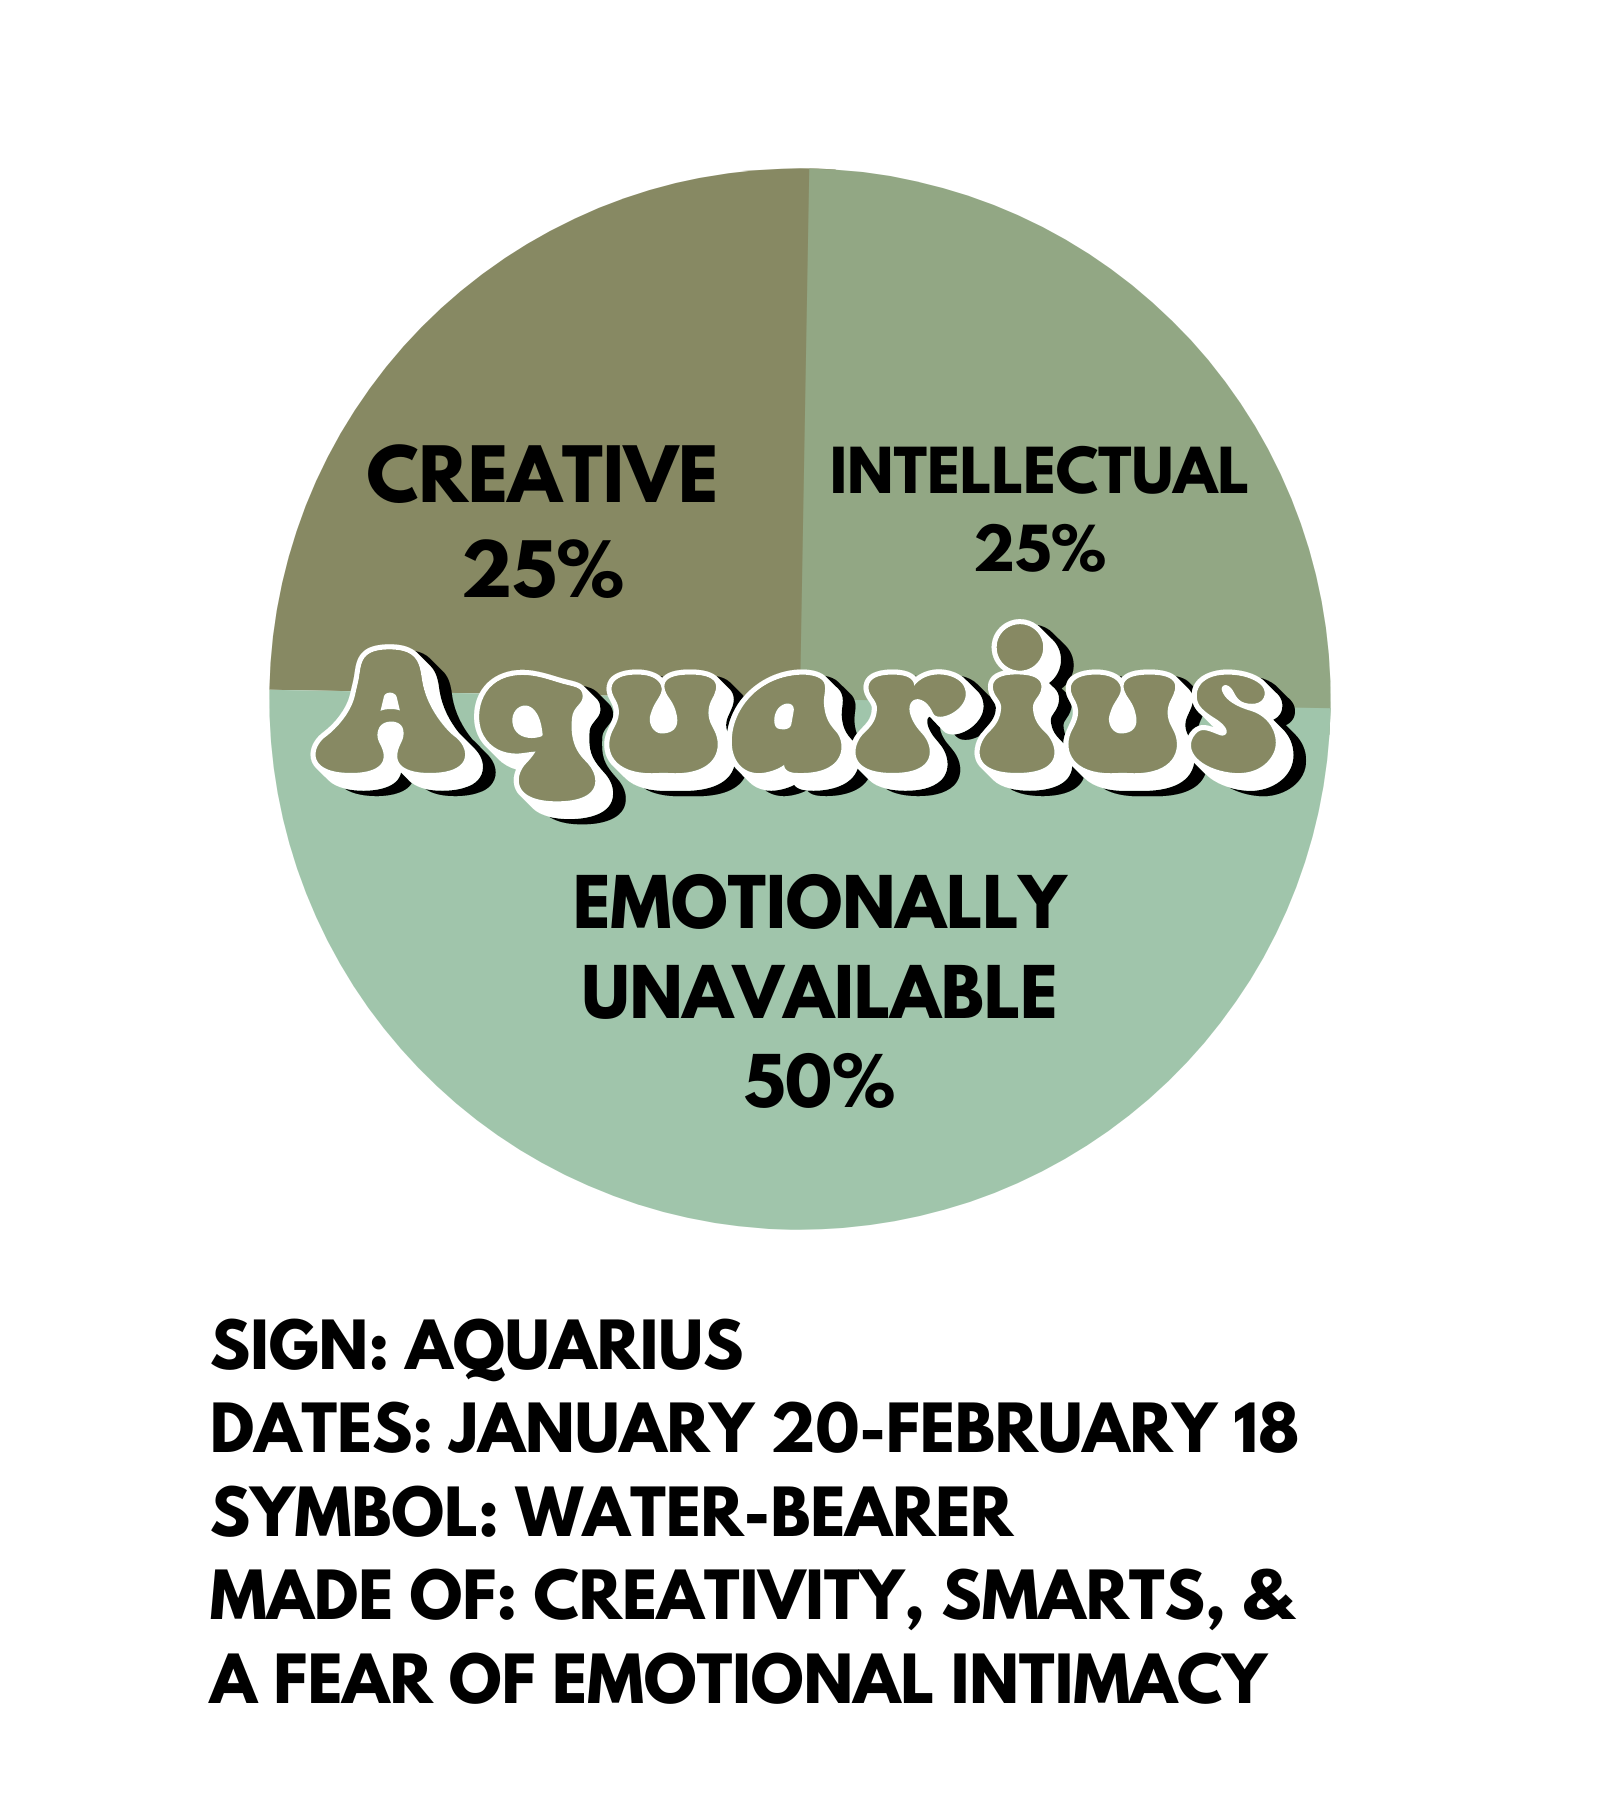 A circular sticker design of a pie chart, with the word Aquarius in the middle. The pie chart is broken up into 3 sections: 50% emotionally unavailable, 25% creative, 25% intellectual. Underneath the design there is the text: SIGN: AQUARIUS DATES: JANUARY 20-FEBRUARY 18 SYMBOL: WATER-BEARER MADE OF: CREATIVITY, SMARTS, & A FEAR OF EMOTIONAL INTIMACY.